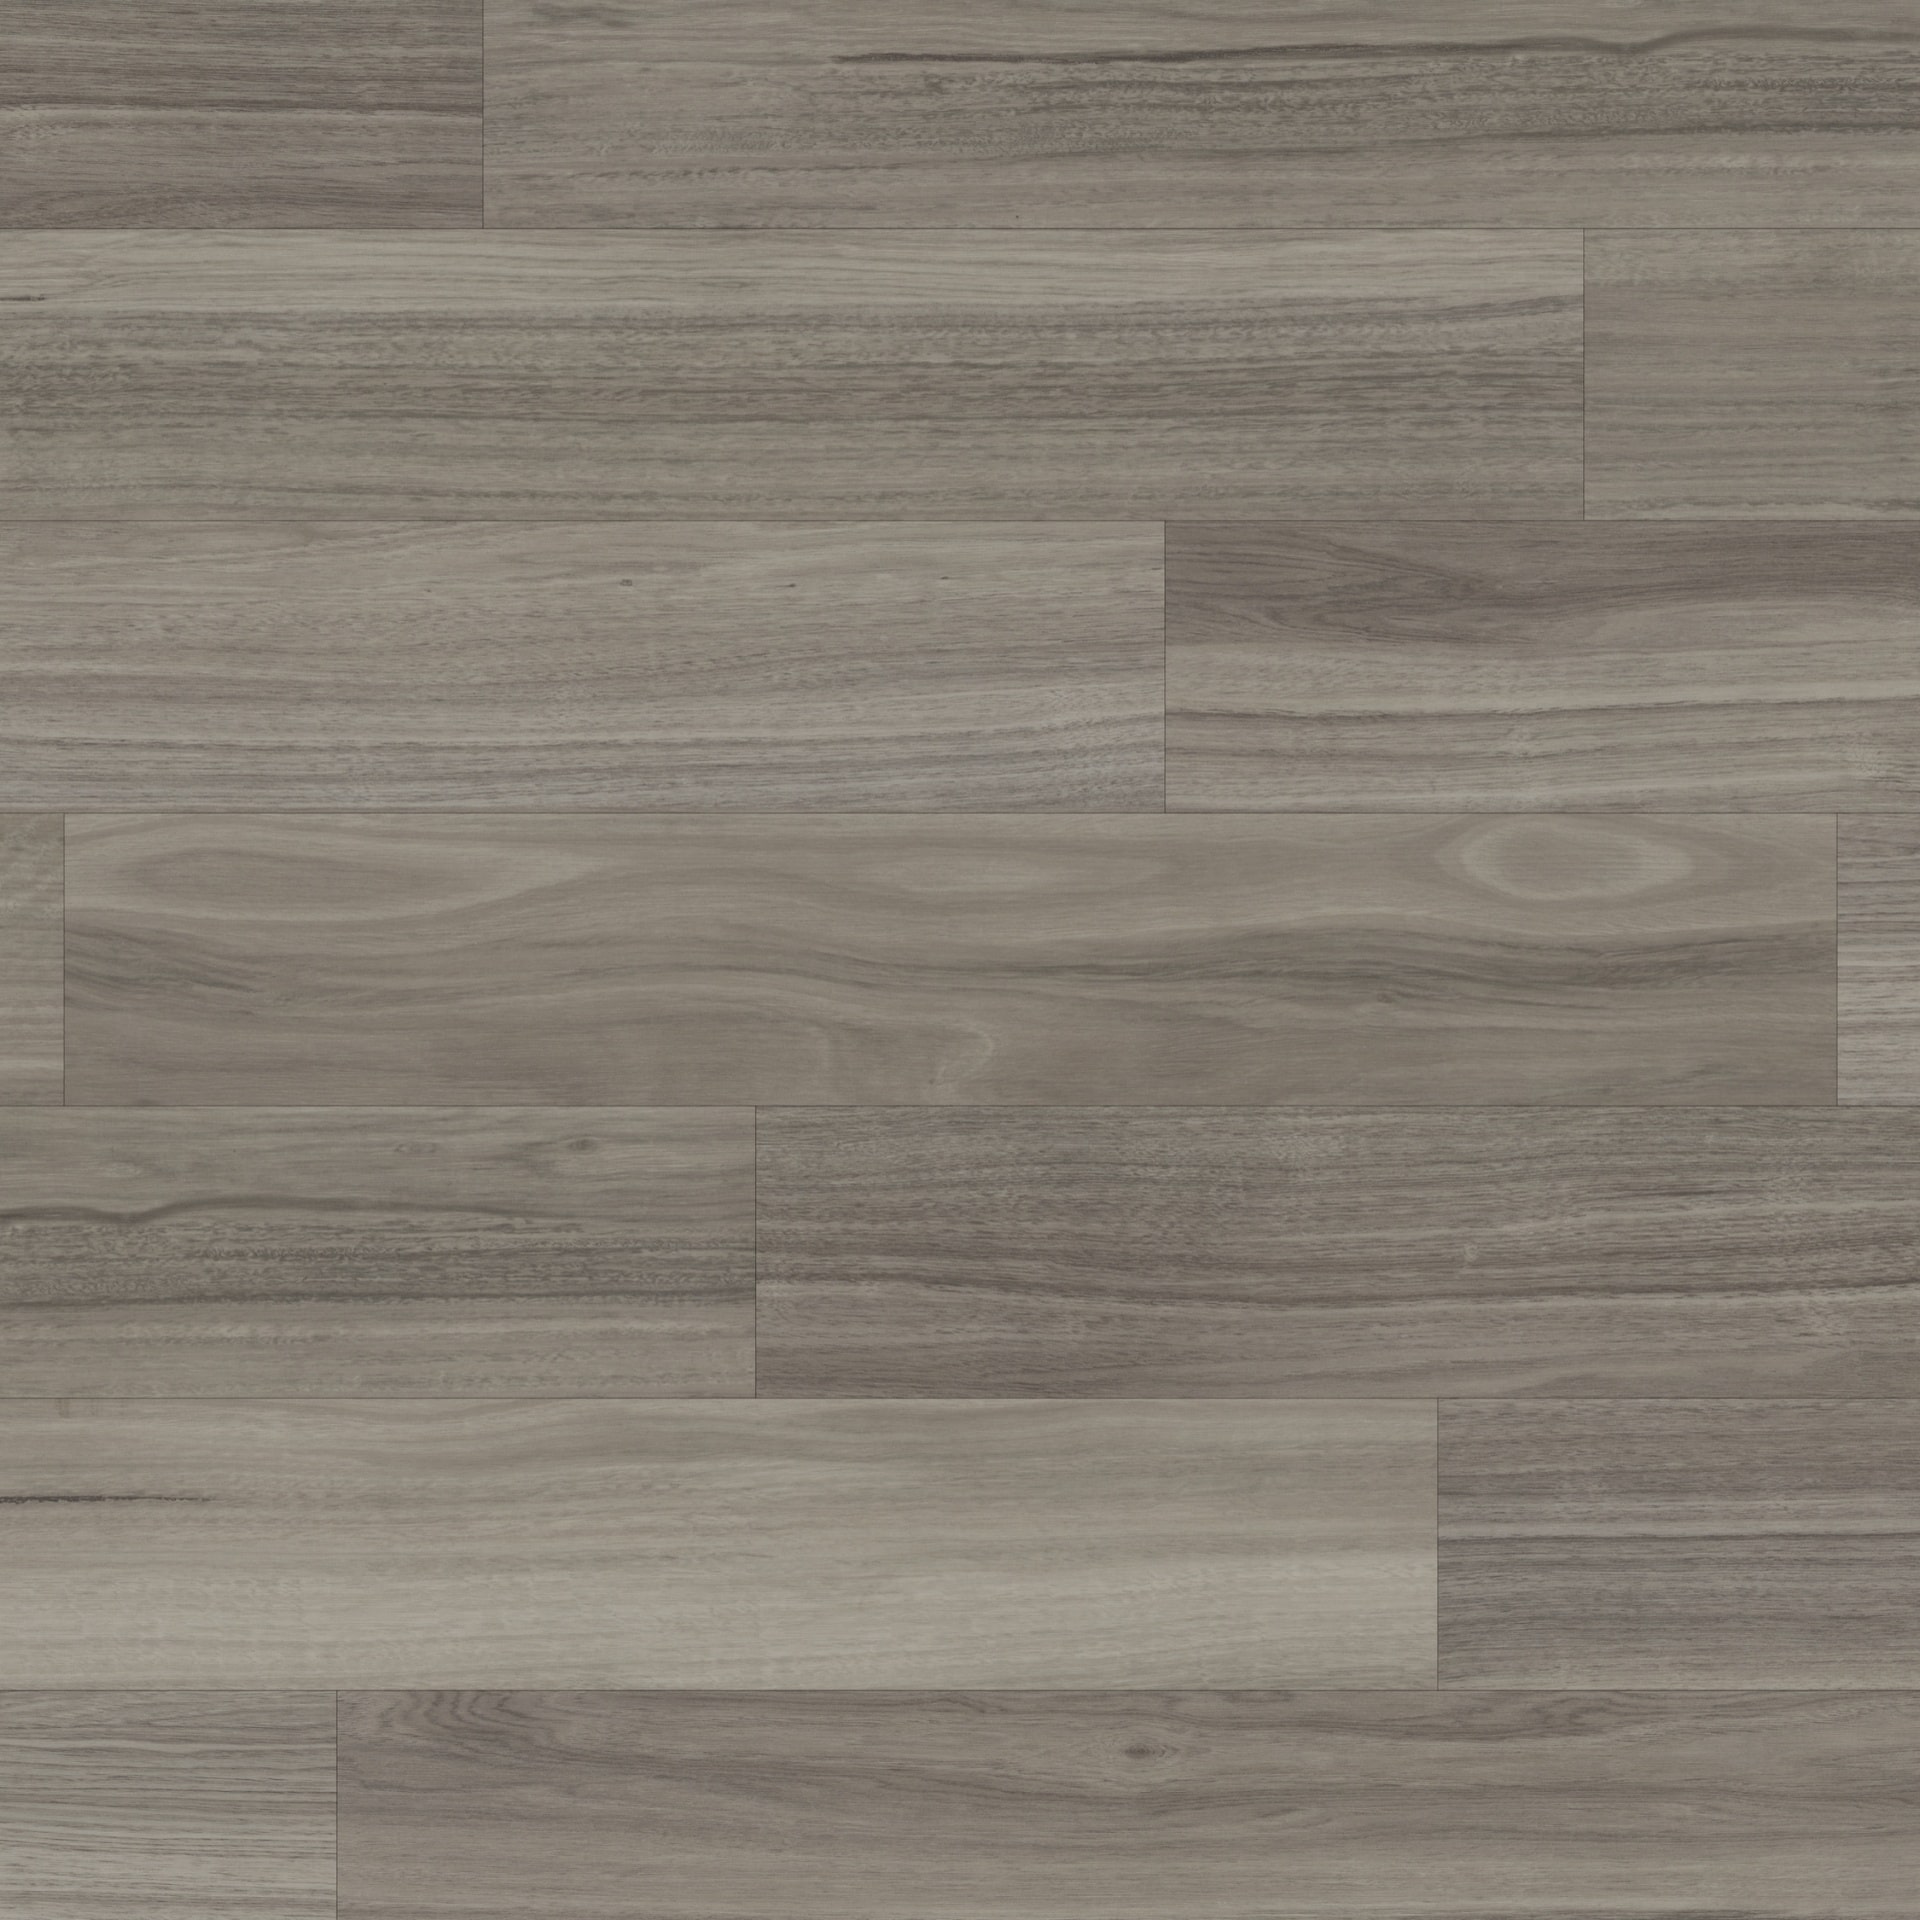 KP141 URBAN SPOTTED GUM